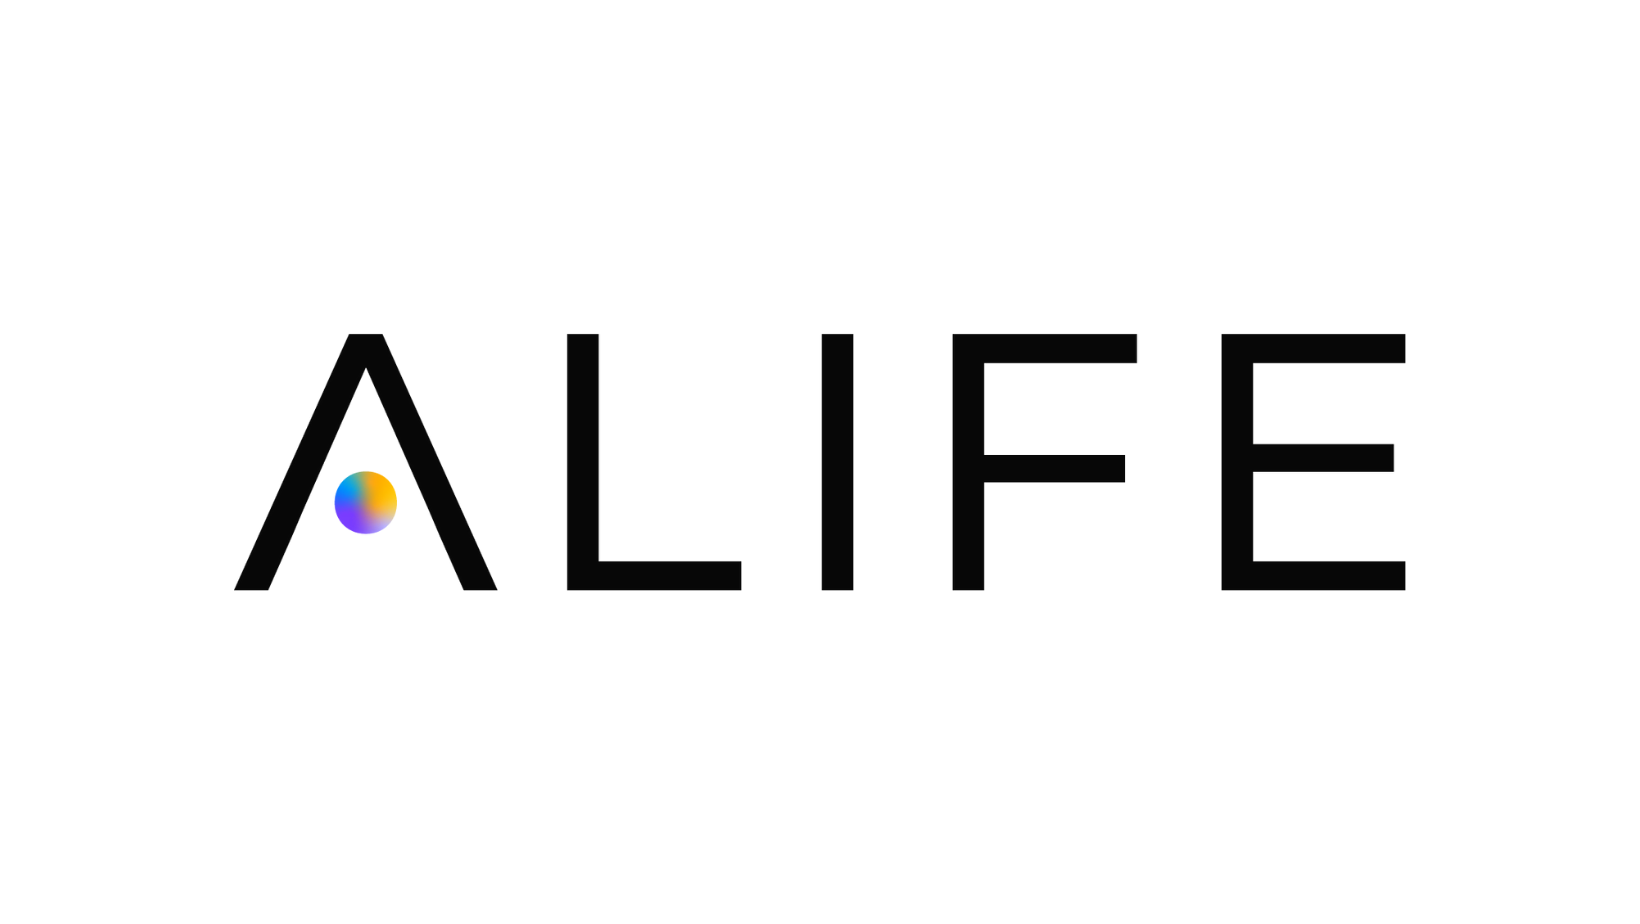 IVF powered by artificial intelligence | Alife